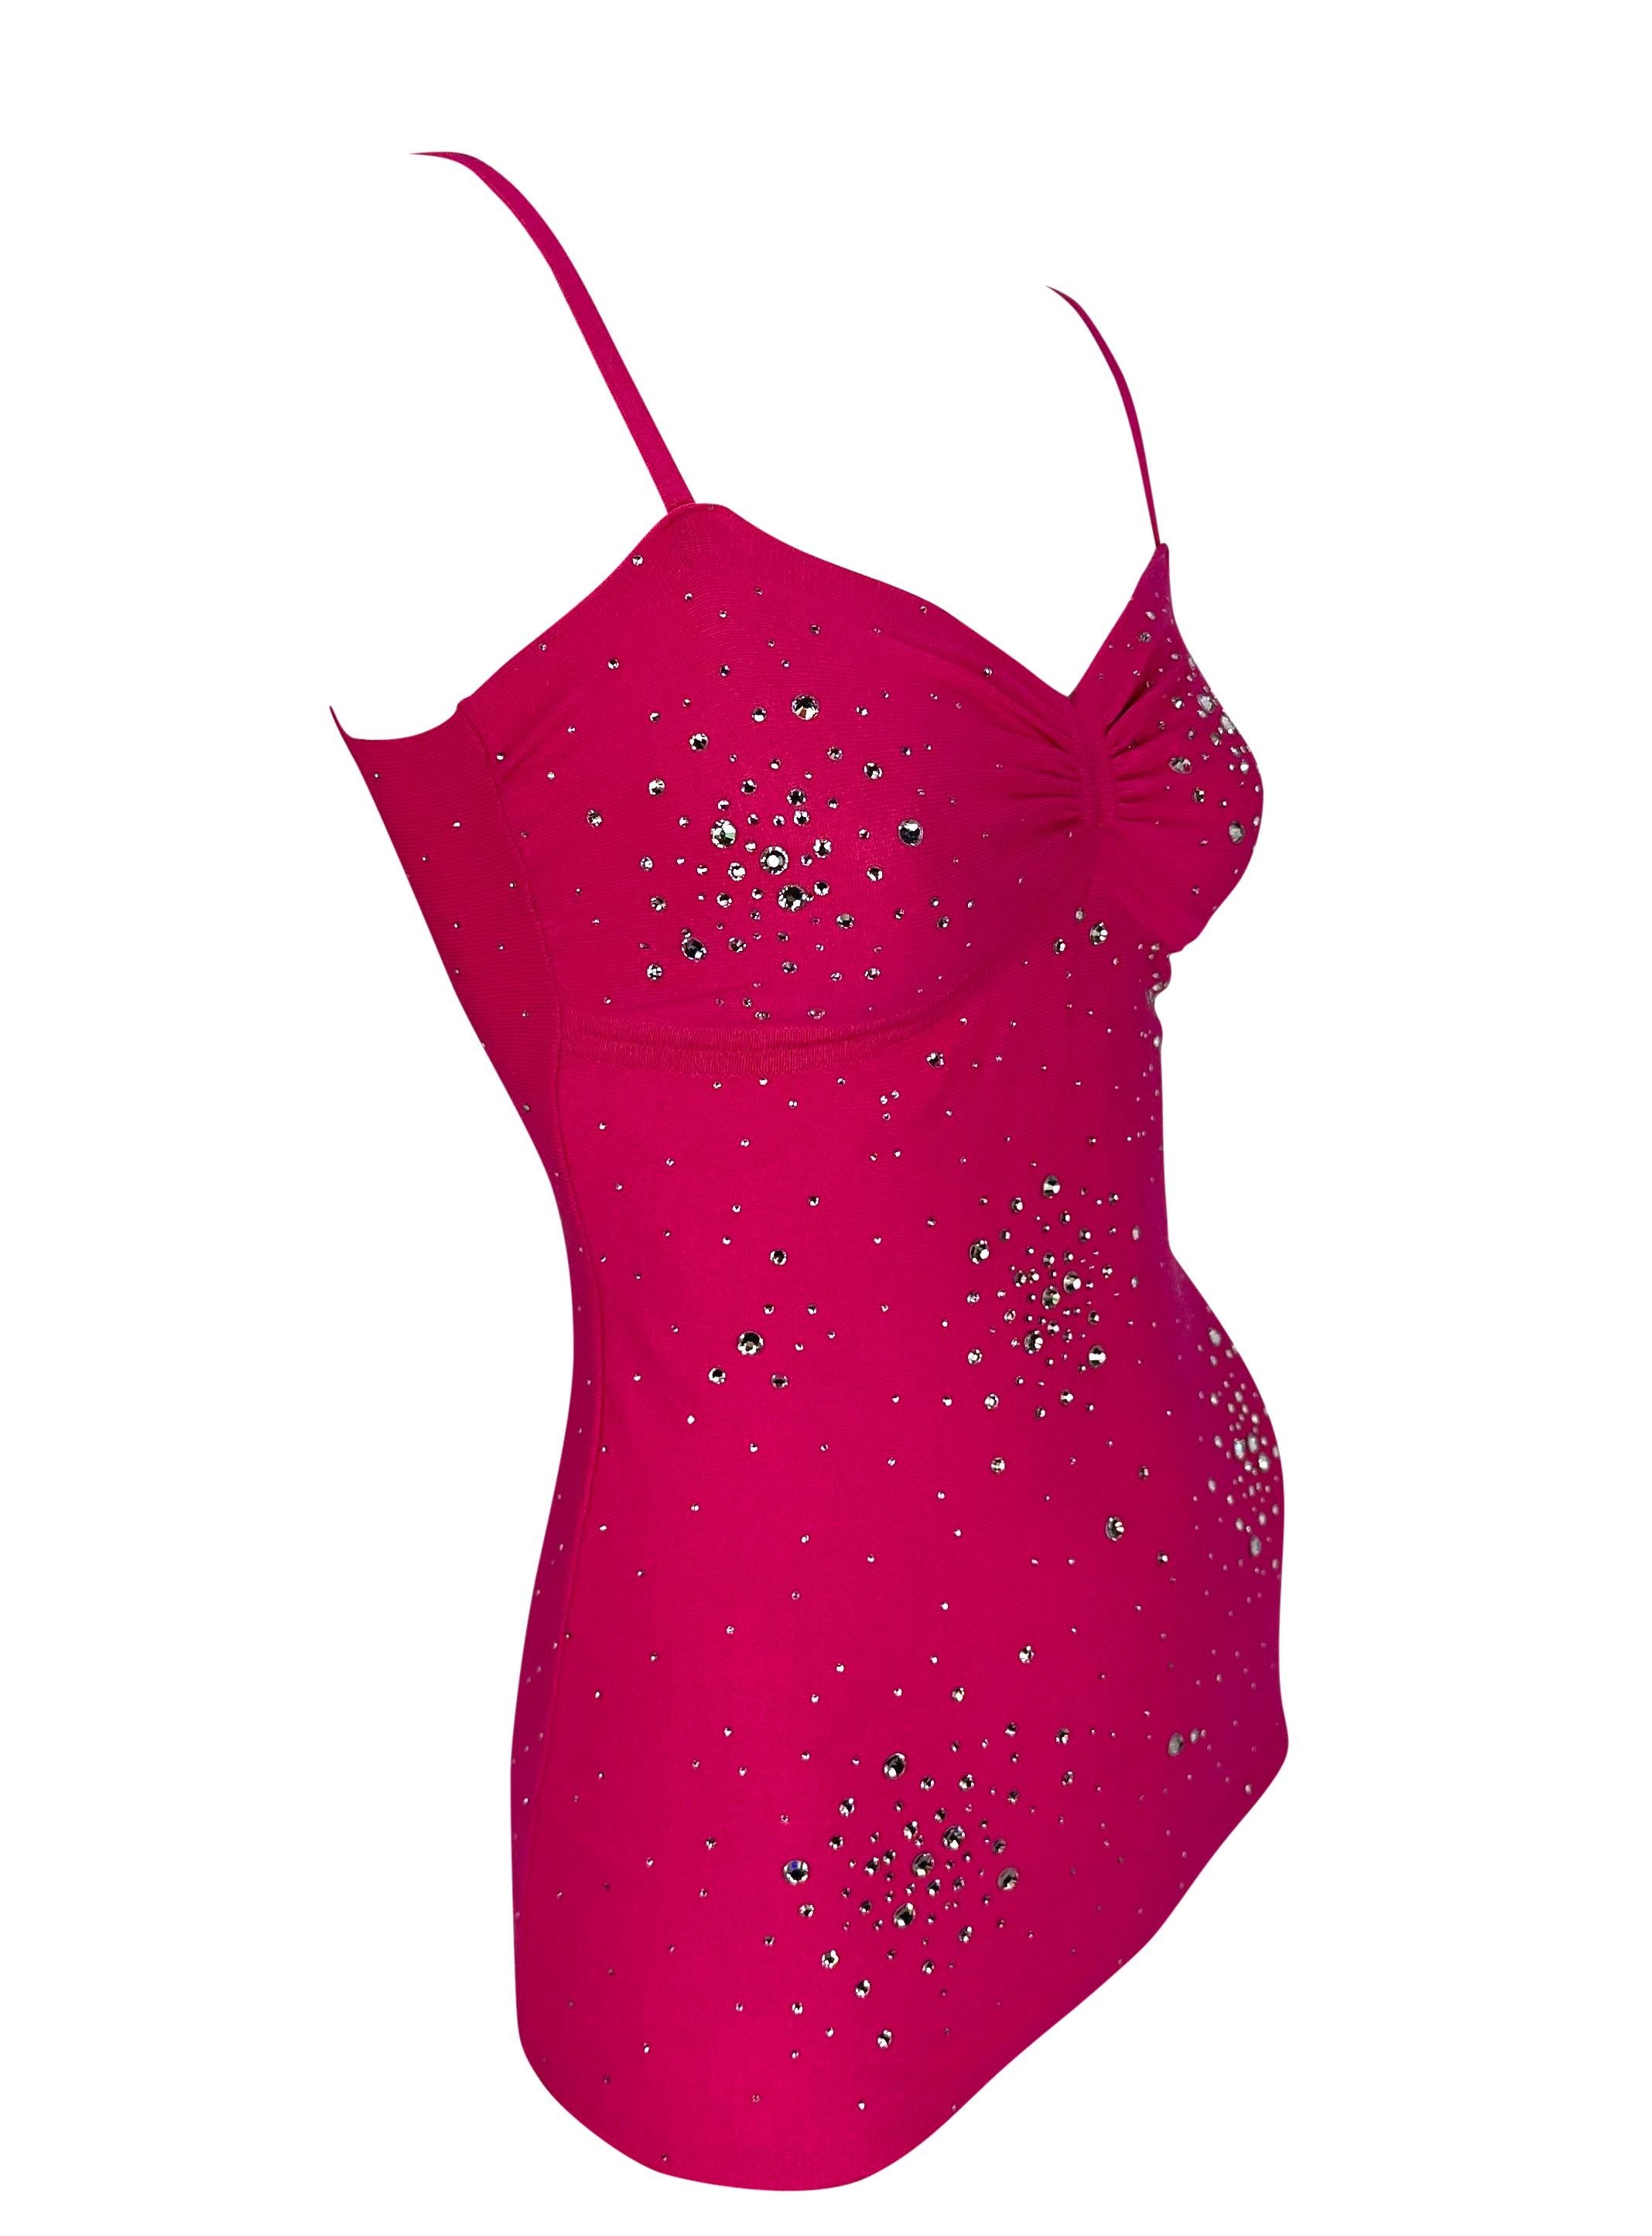 S/S 2004 Versace by Donatella Hot Pink Rhinestone Stretch Knit Tank Top  For Sale 1